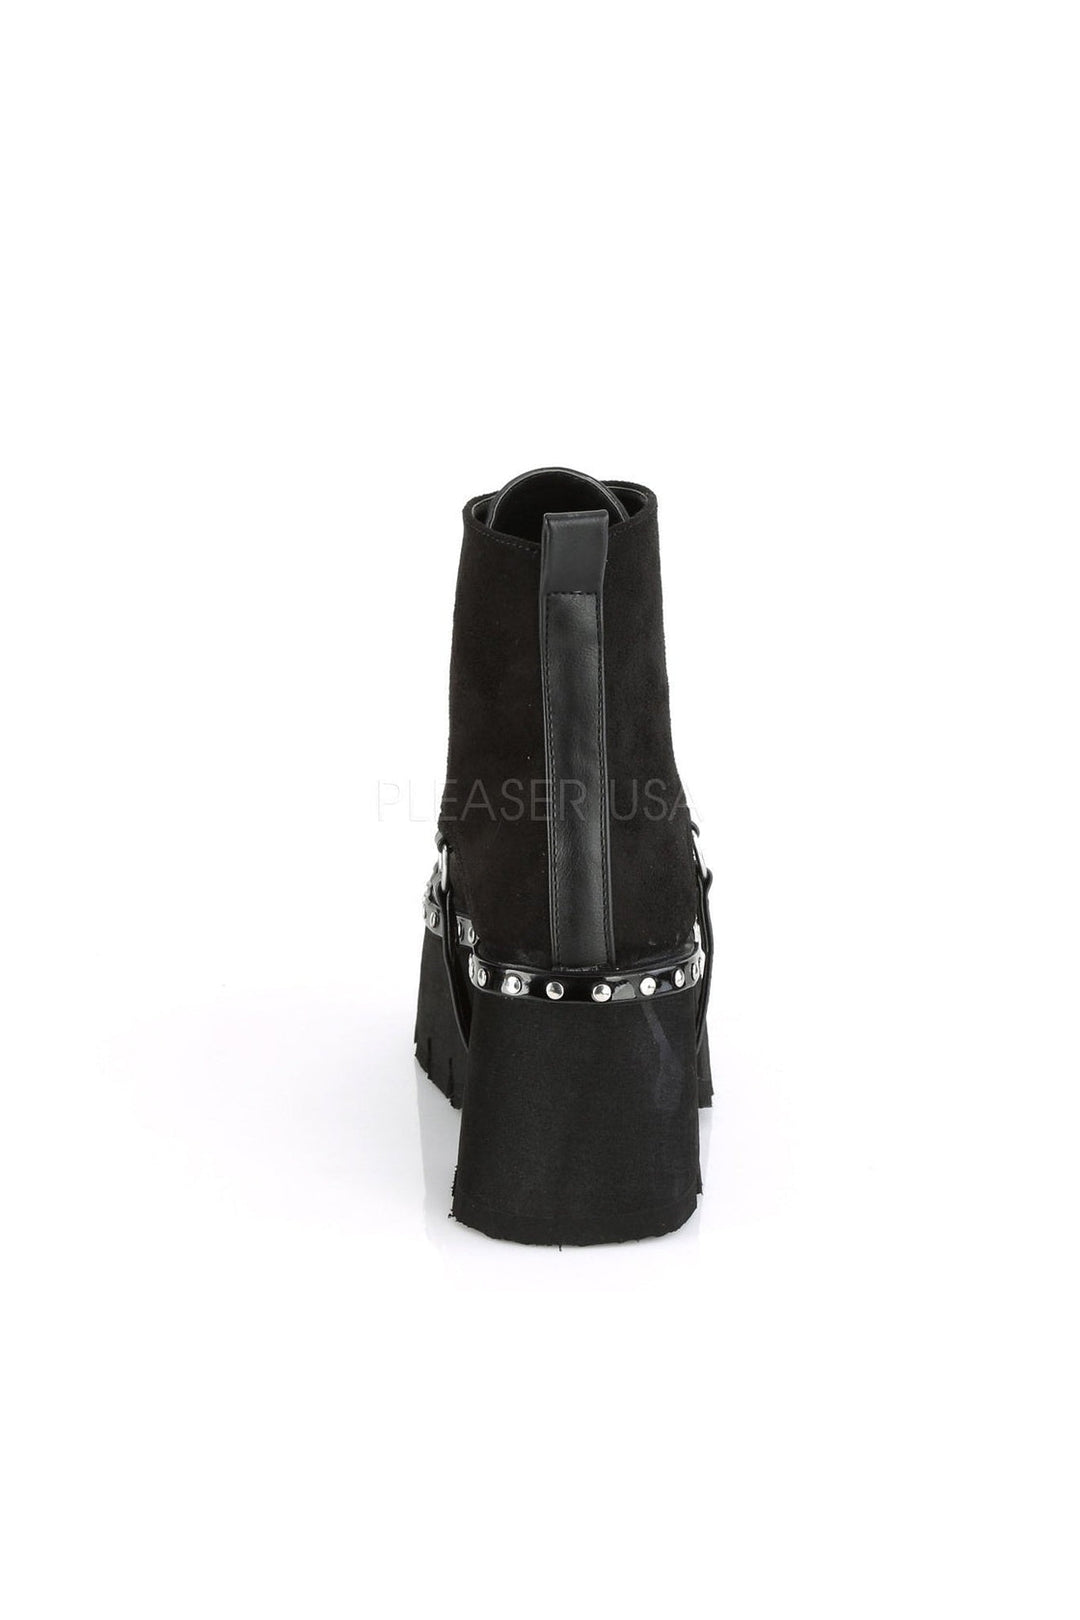 ASHES-100 Demonia Ankle Boot-Demonia-SEXYSHOES.COM